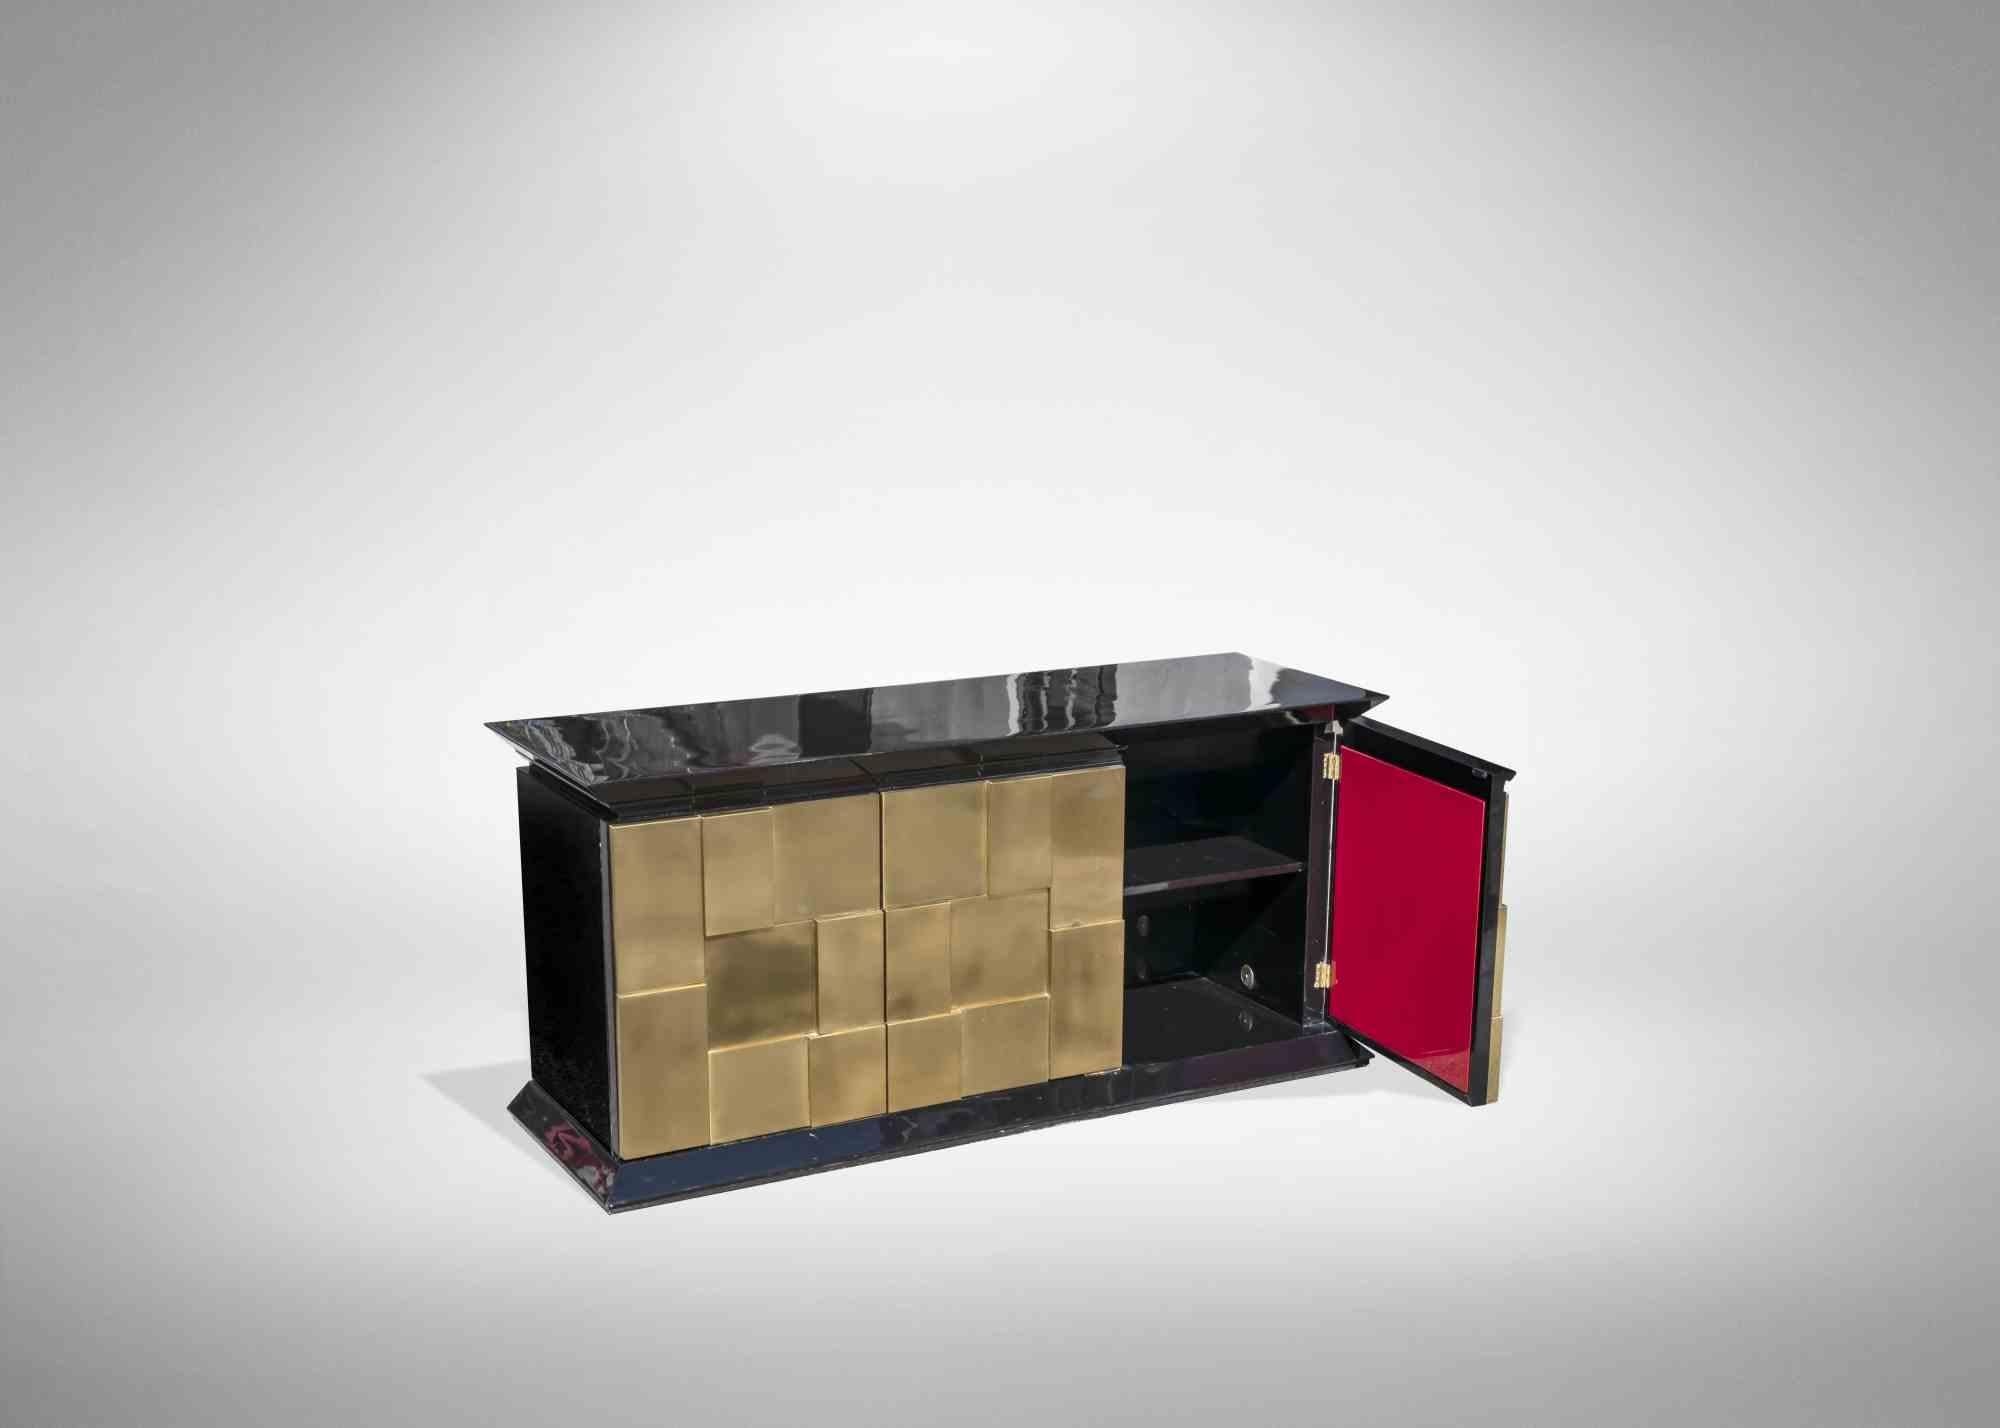 Cabinet set is an original contemporary designer's furniture realized in Italy in the 1970s by Luciano Frigerio (1928–1999).

A vintage sideboard realized in black lacquered tops and brushed brass paneling on the front.

Made in